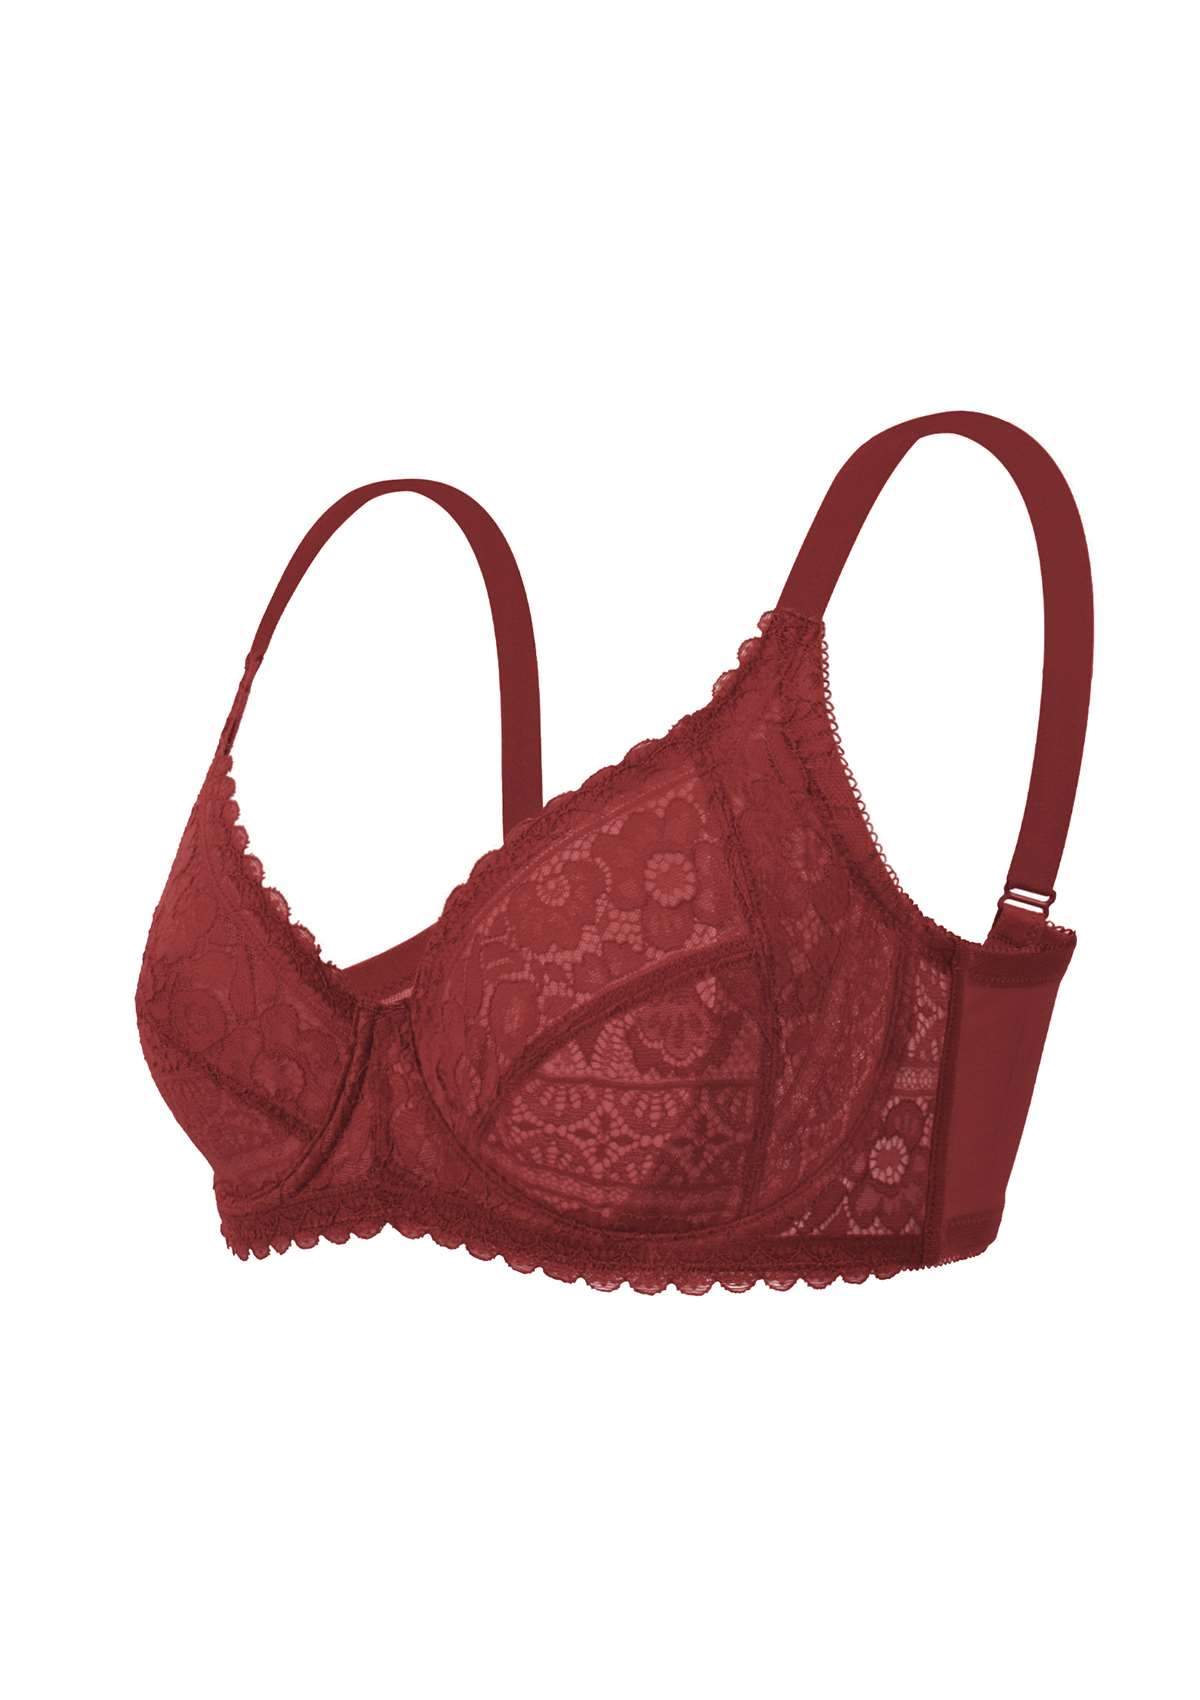 HSIA Freesia Unlined Lace Bra: Bra That Supports Back - Red / 34 / D